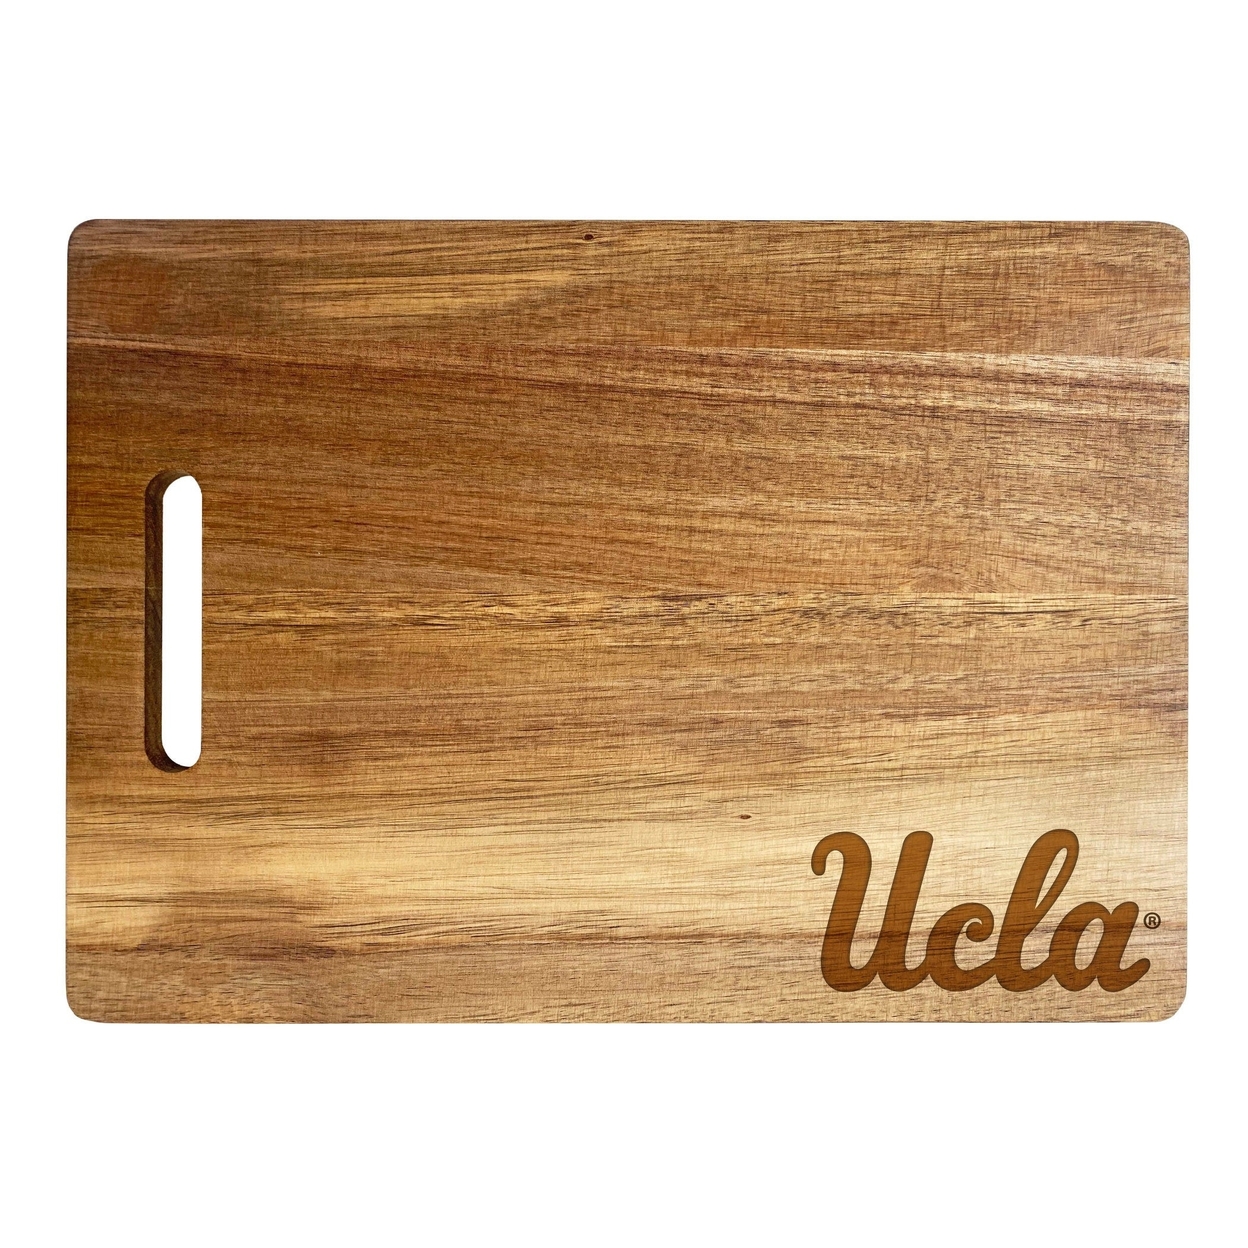 UCLA Bruins Engraved Wooden Cutting Board 10 X 14 Acacia Wood - Small Engraving